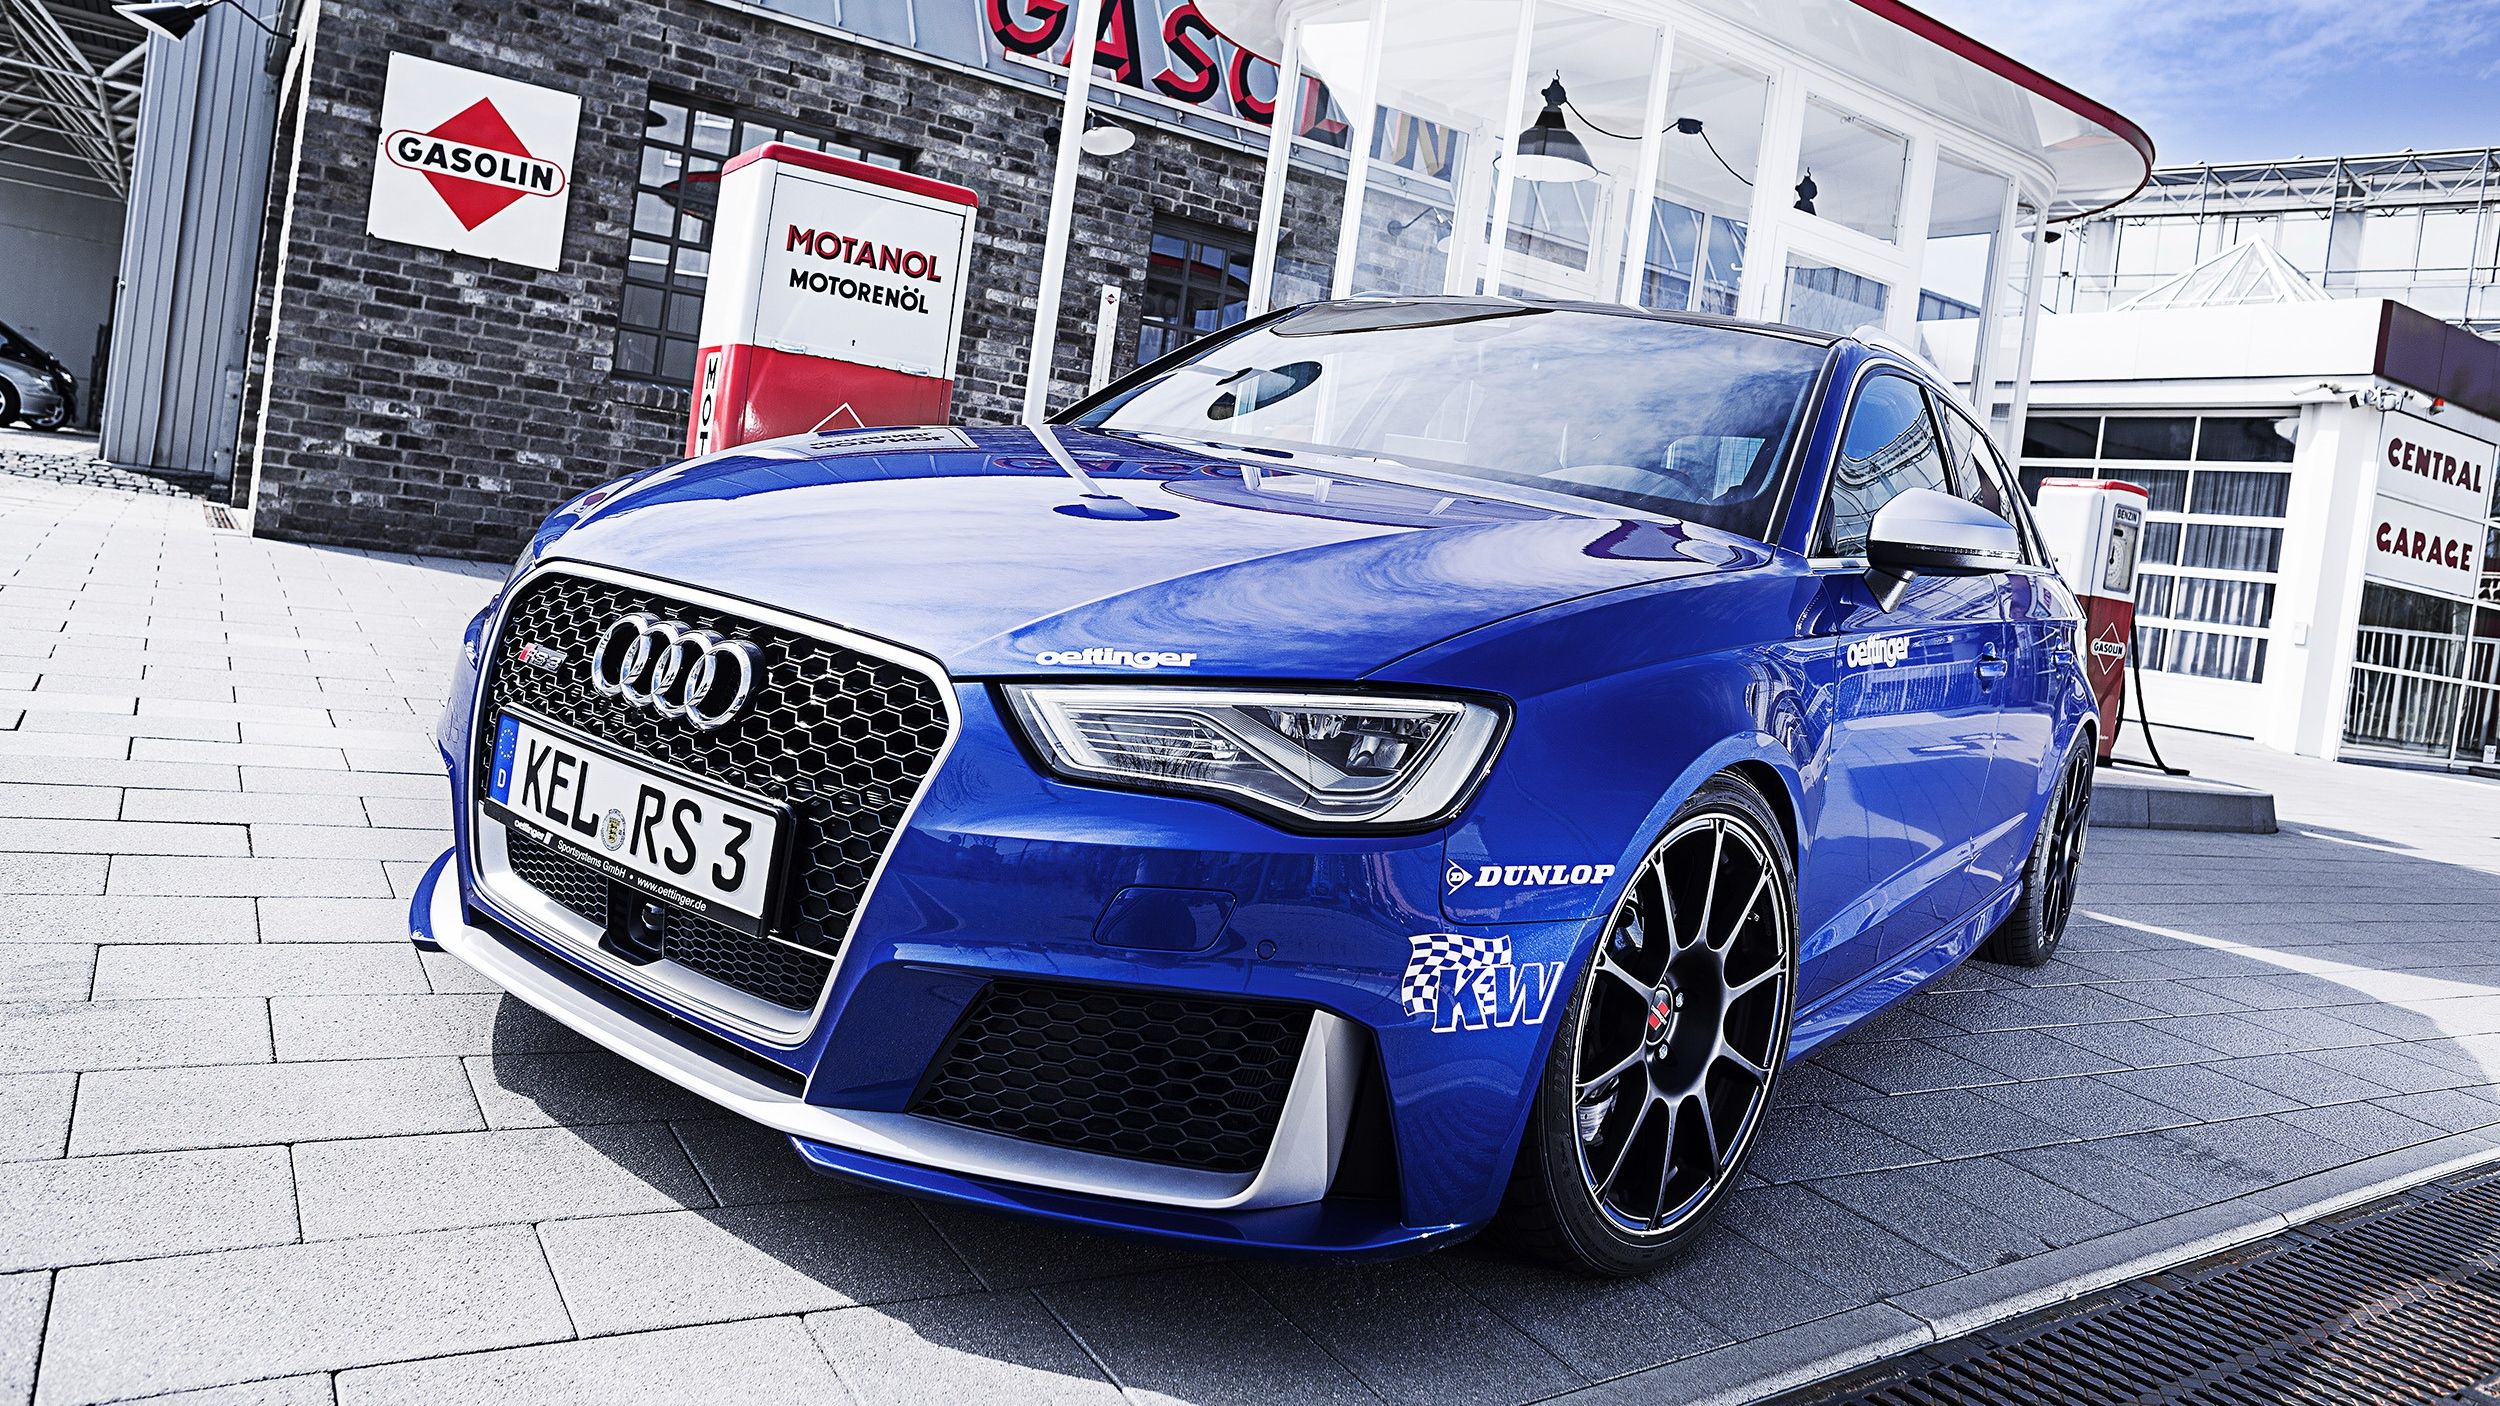 2016 Audi RS3 by Oettinger